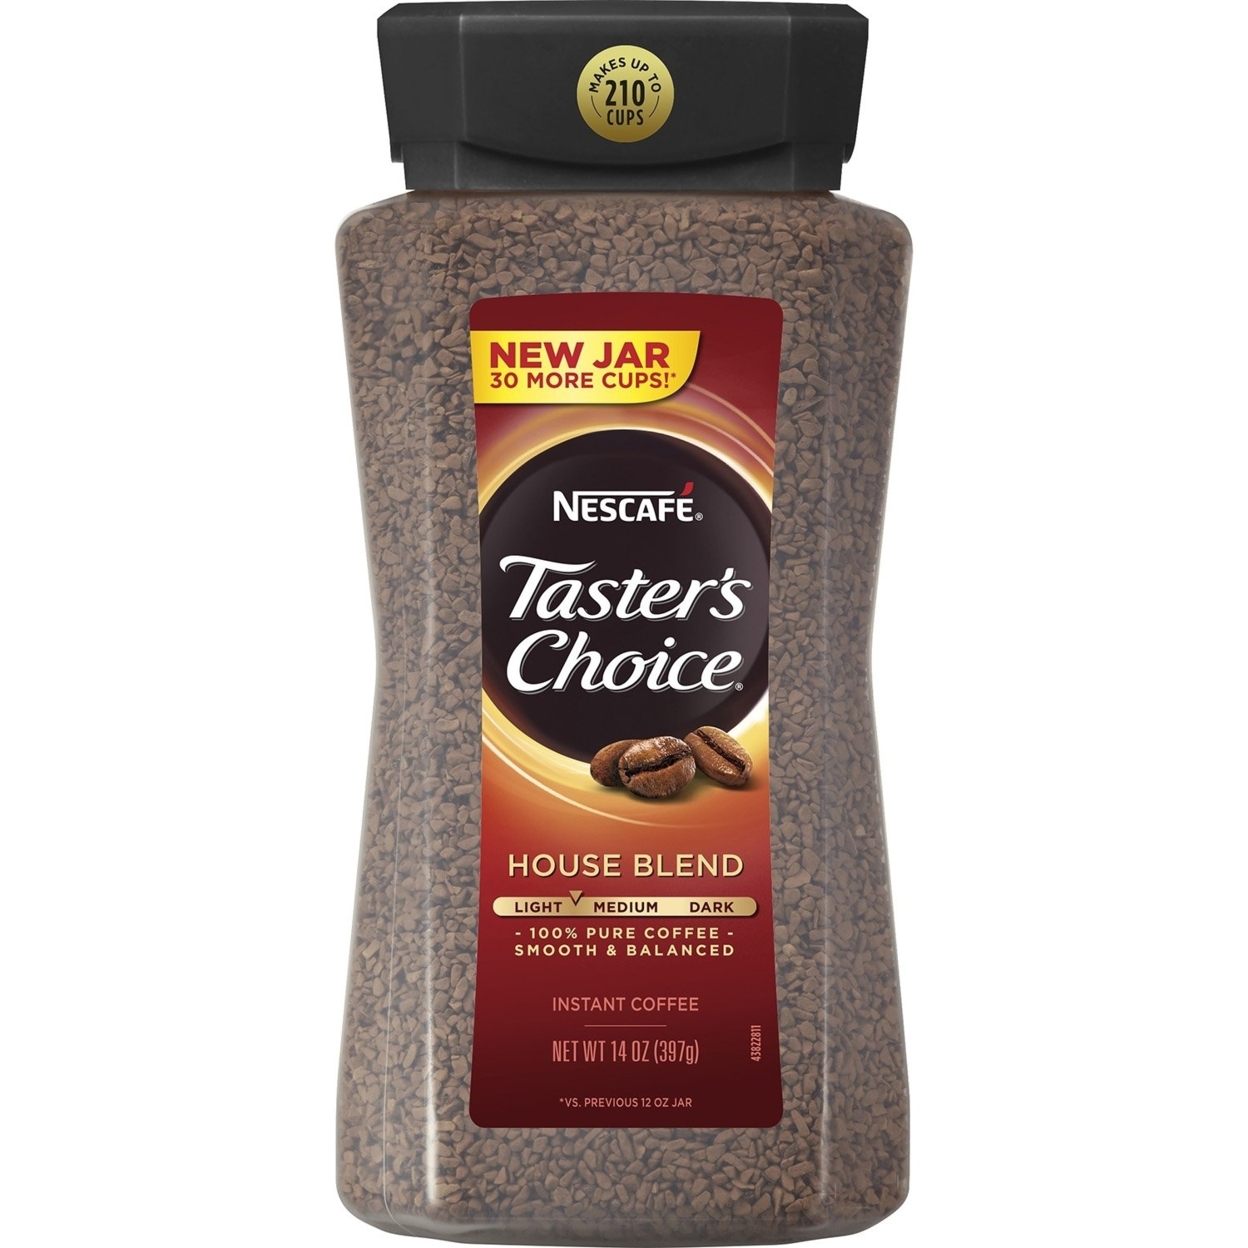 NESCAFE Taster's Choice Instant Coffee, House Blend (14 Ounce)